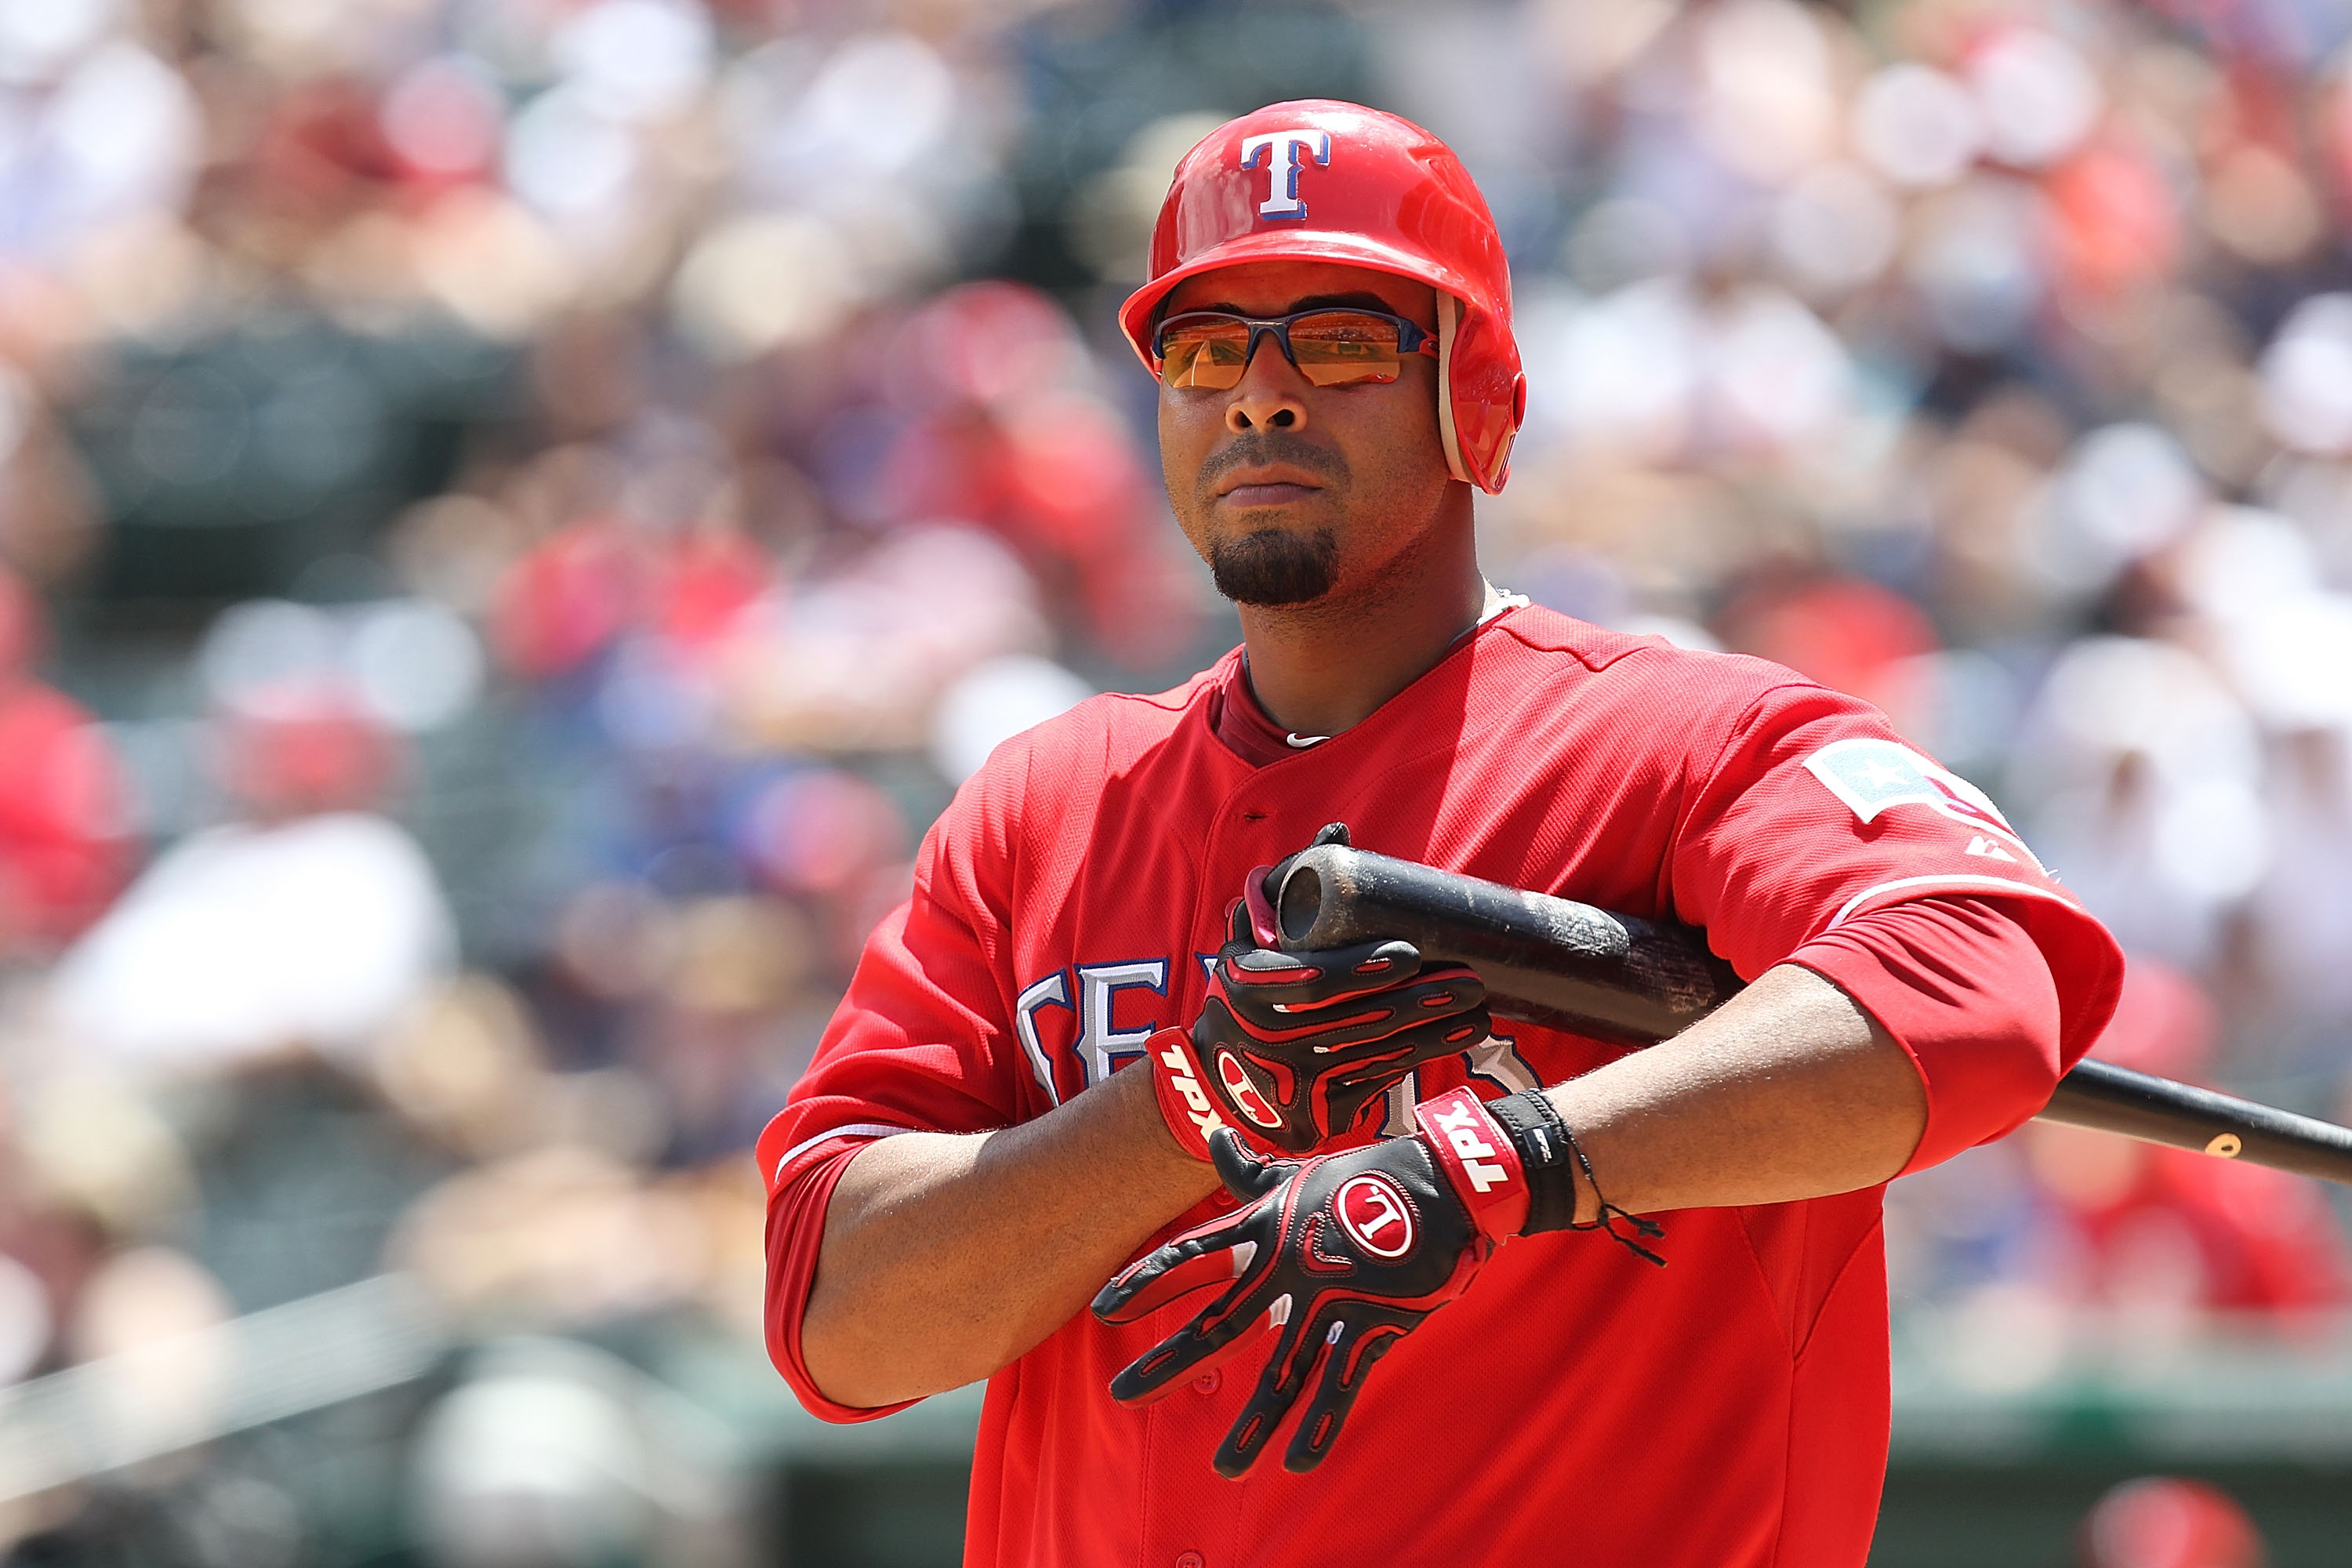 ARLINGTON, TX - JULY 11:  Nelson Cruz #17 of the Texas Rangers on July 11, 2010 at Rangers Ballpark in Arlington, Texas.  (Photo by Ronald Martinez/Getty Images)